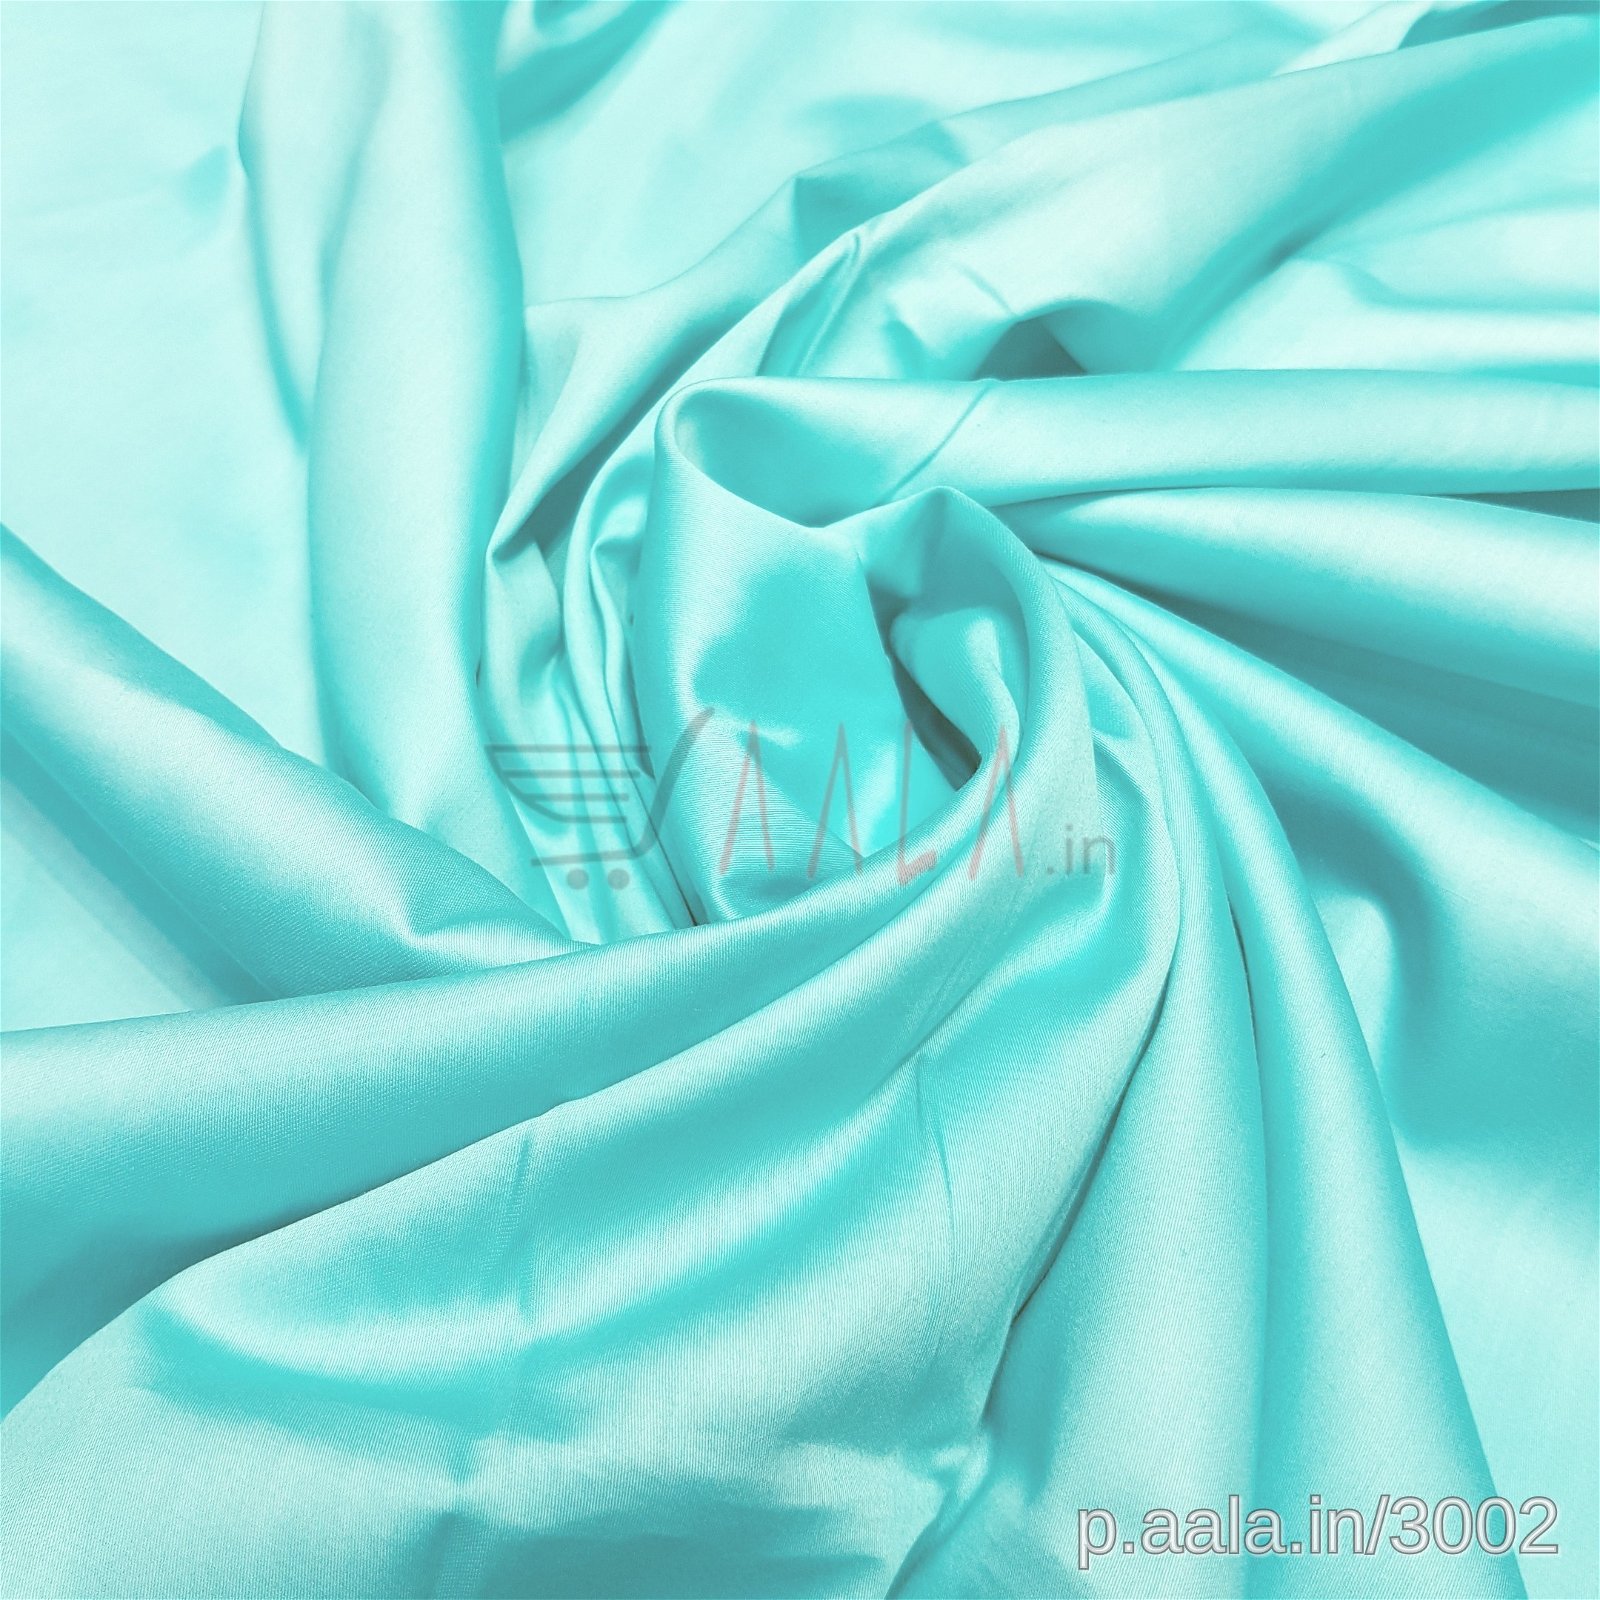 Satin Cotton 44 Inches Dyed Per Metre #3002